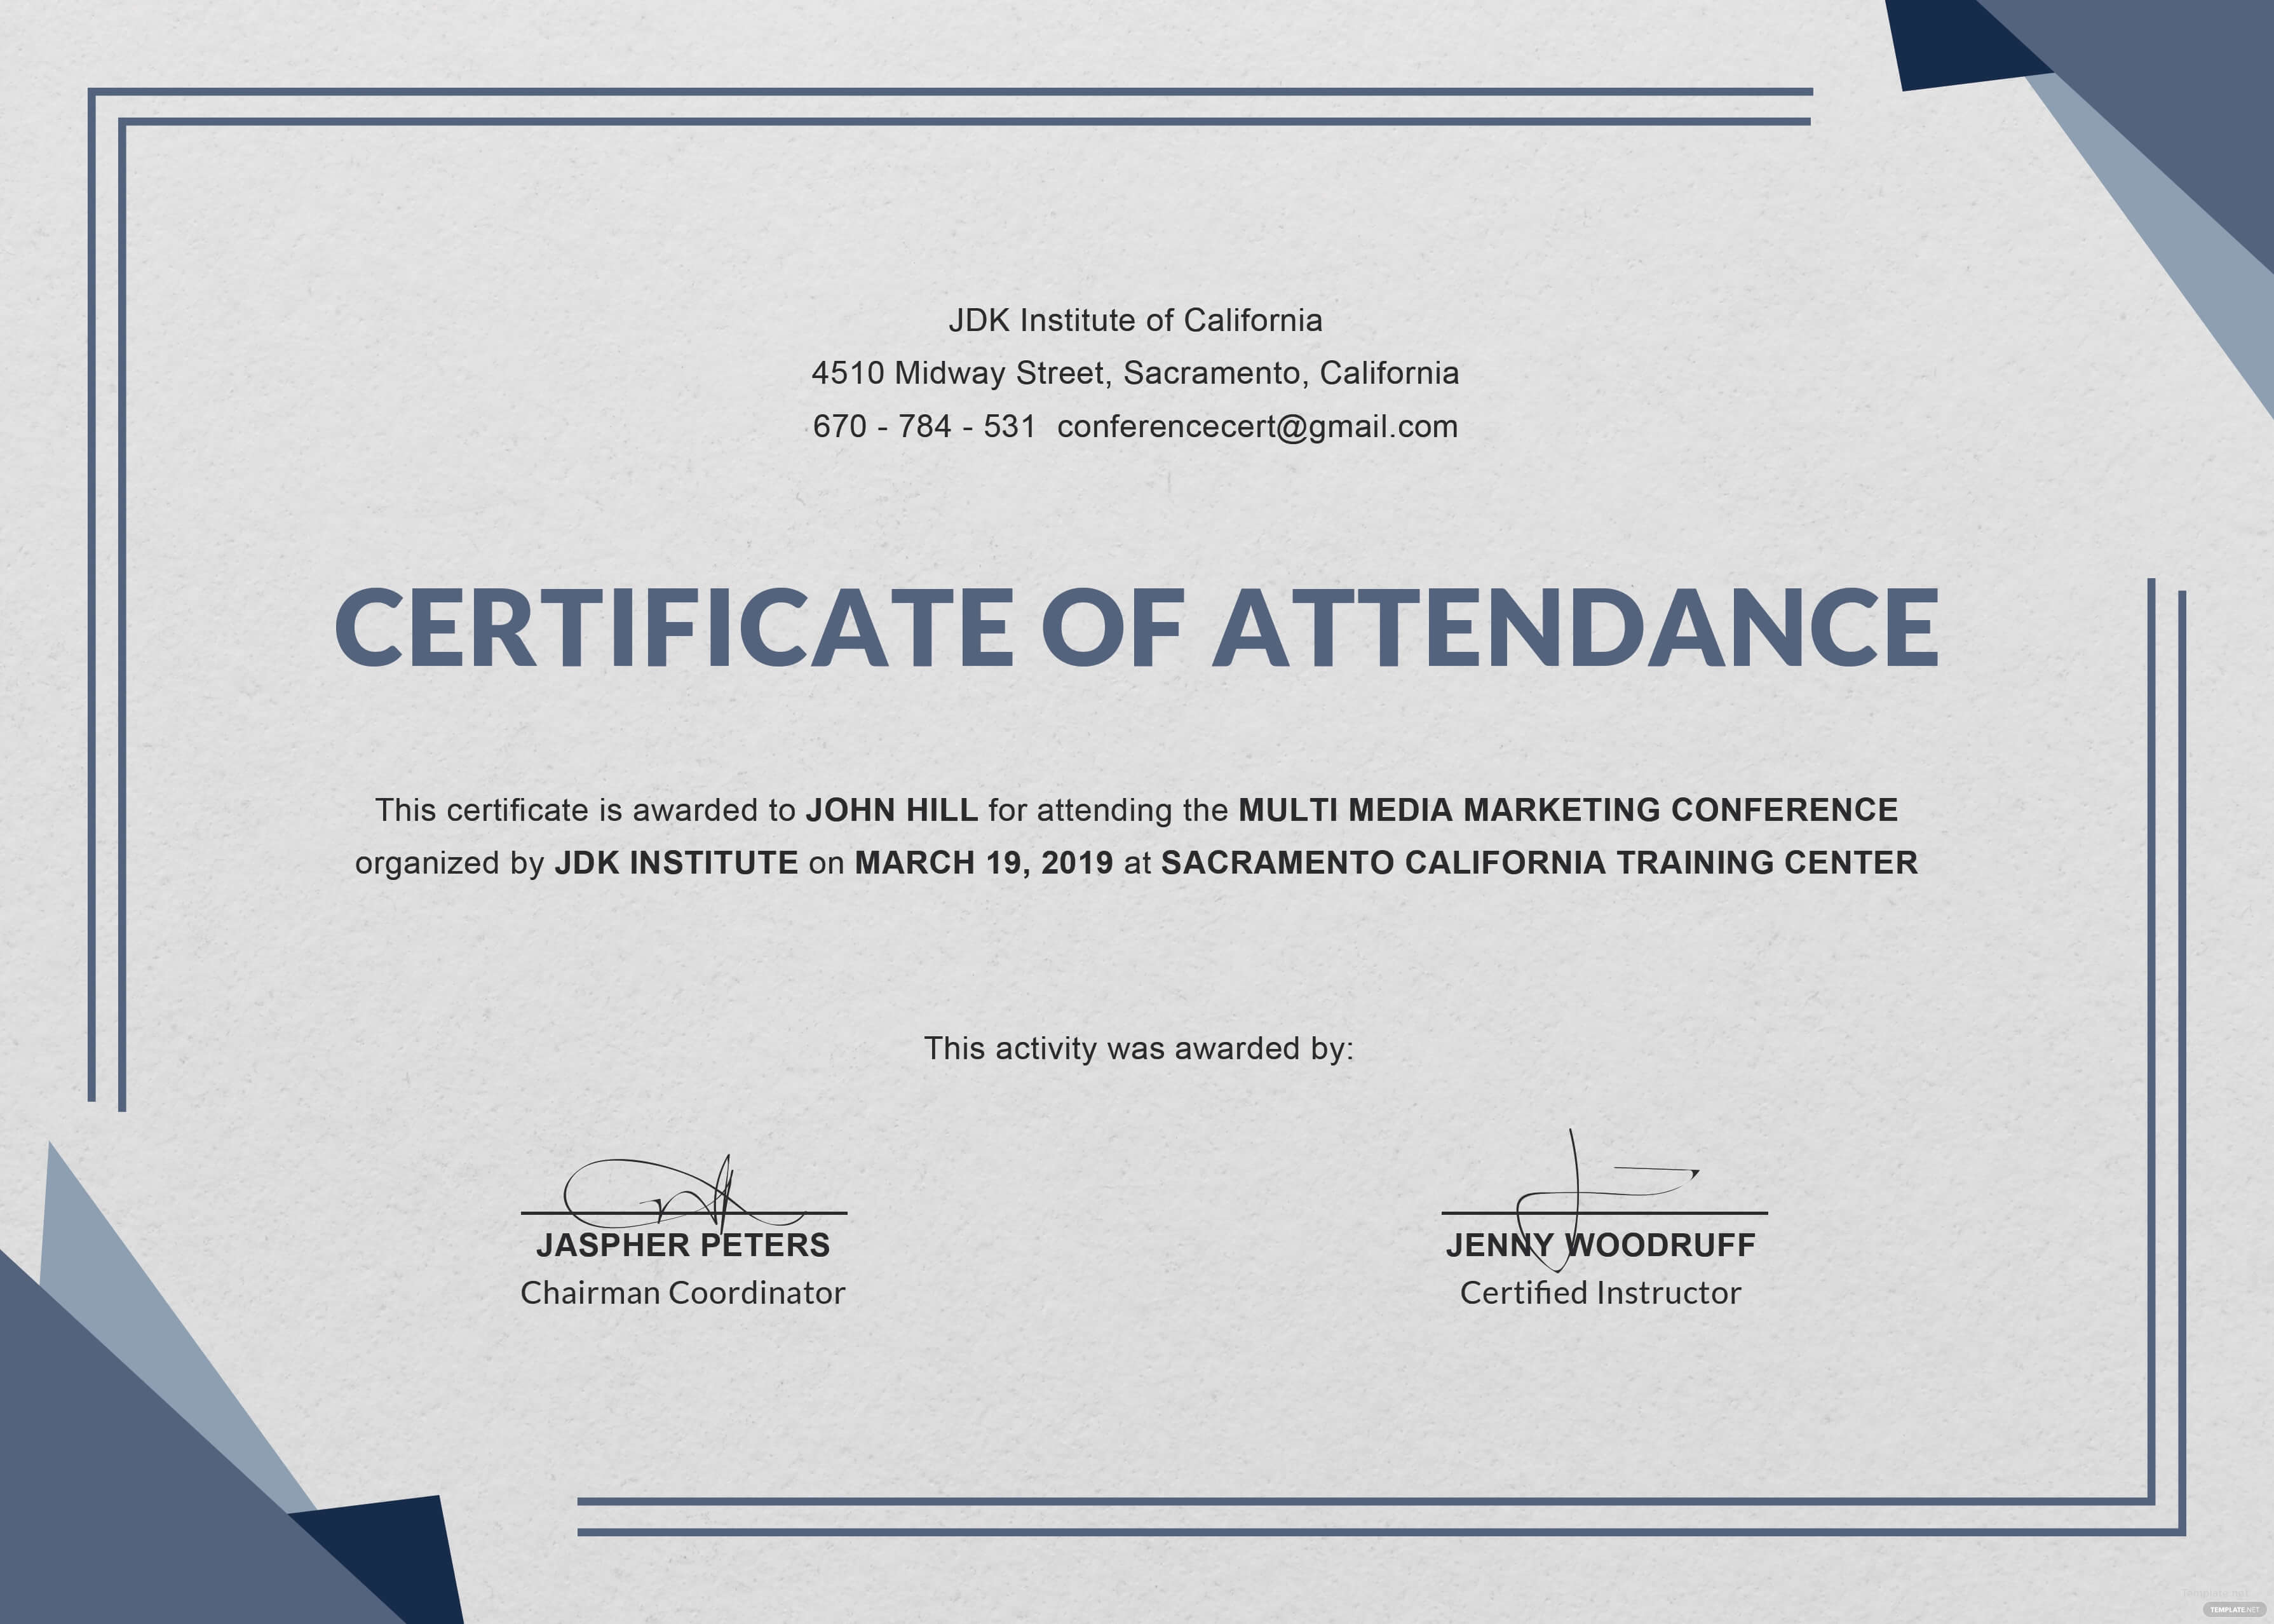 Certificate Templates: Ms Word Perfect Attendance For Indesign Certificate Template